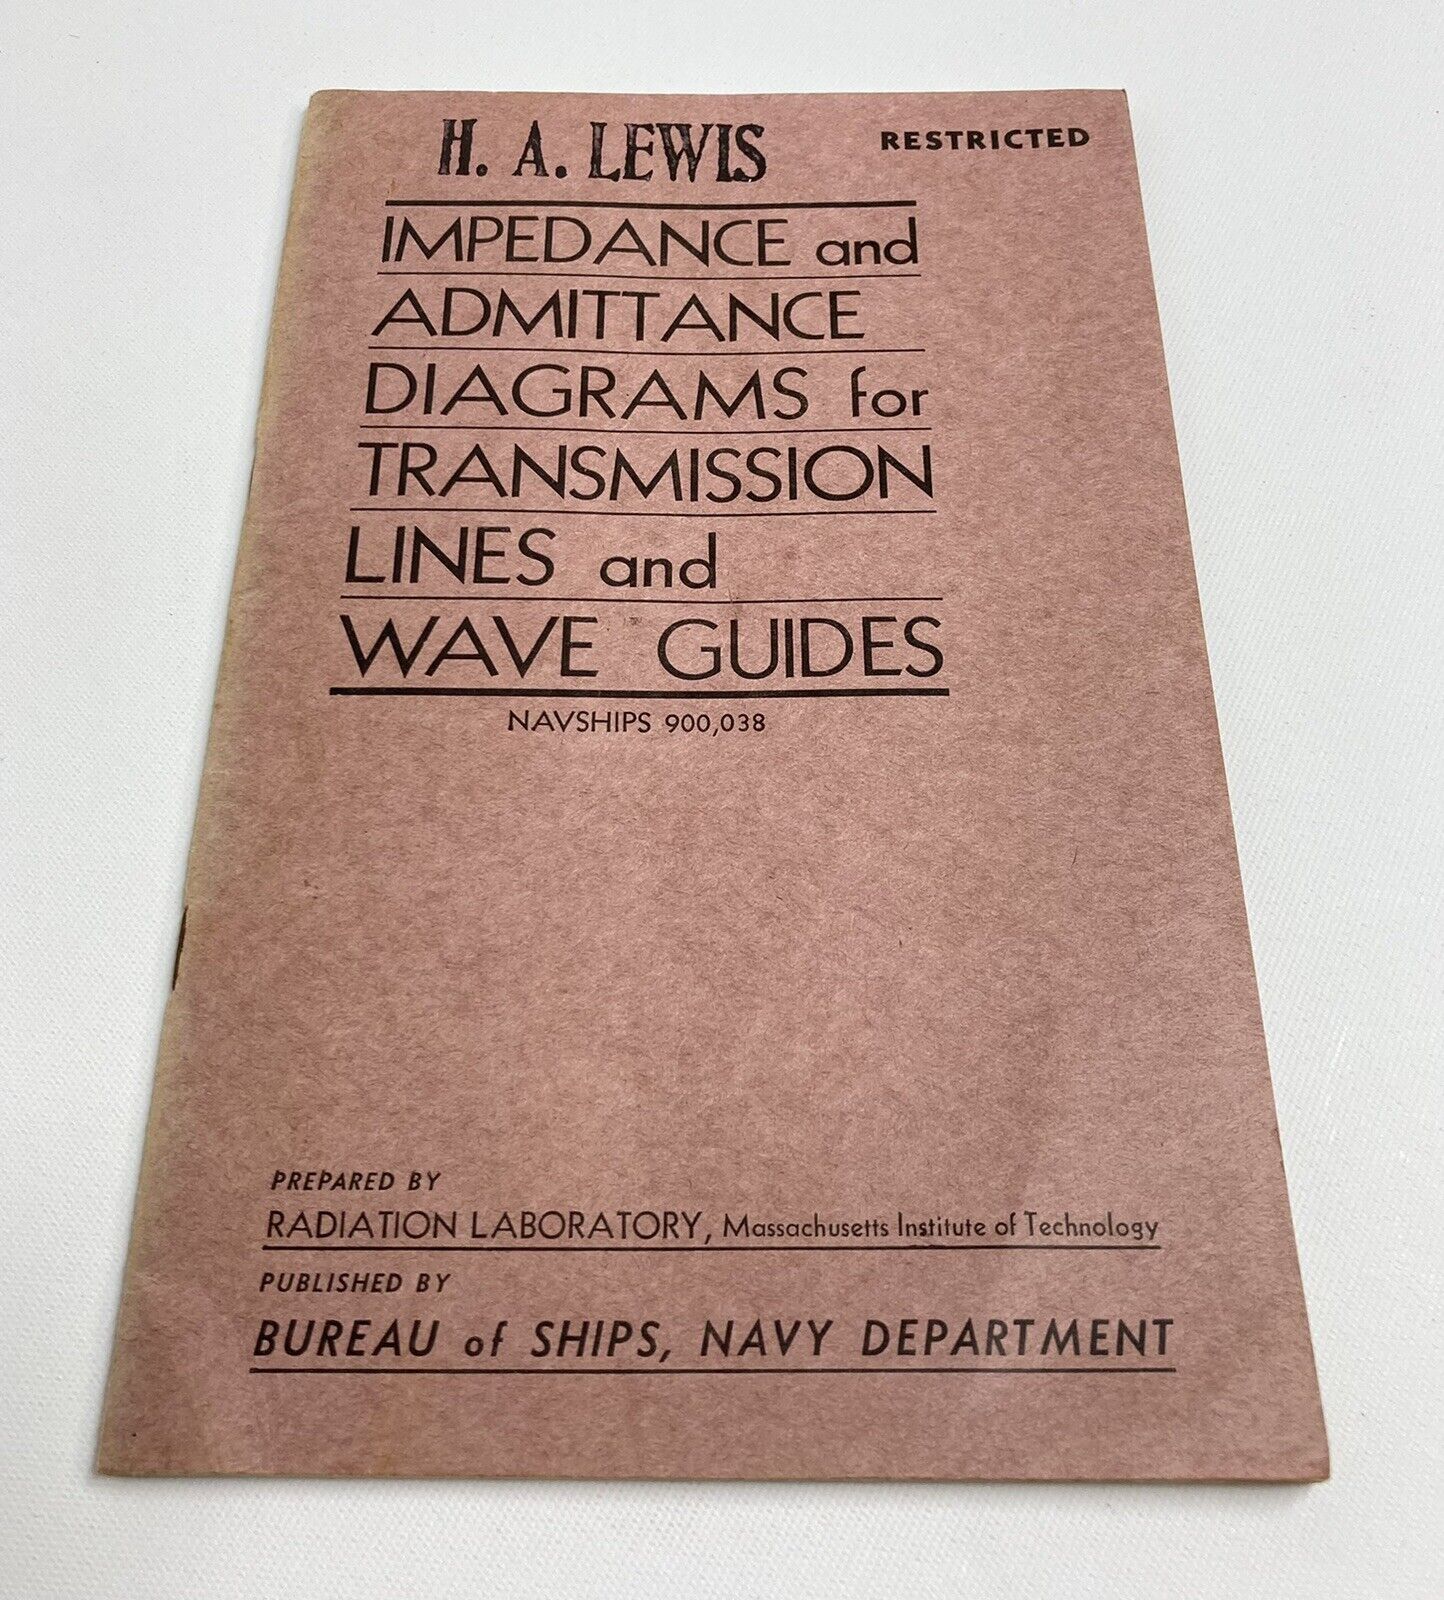 Vintage 1944 US Navy Impedance and Admittance Diagrams NAVSHIPS 900,038 Booklet